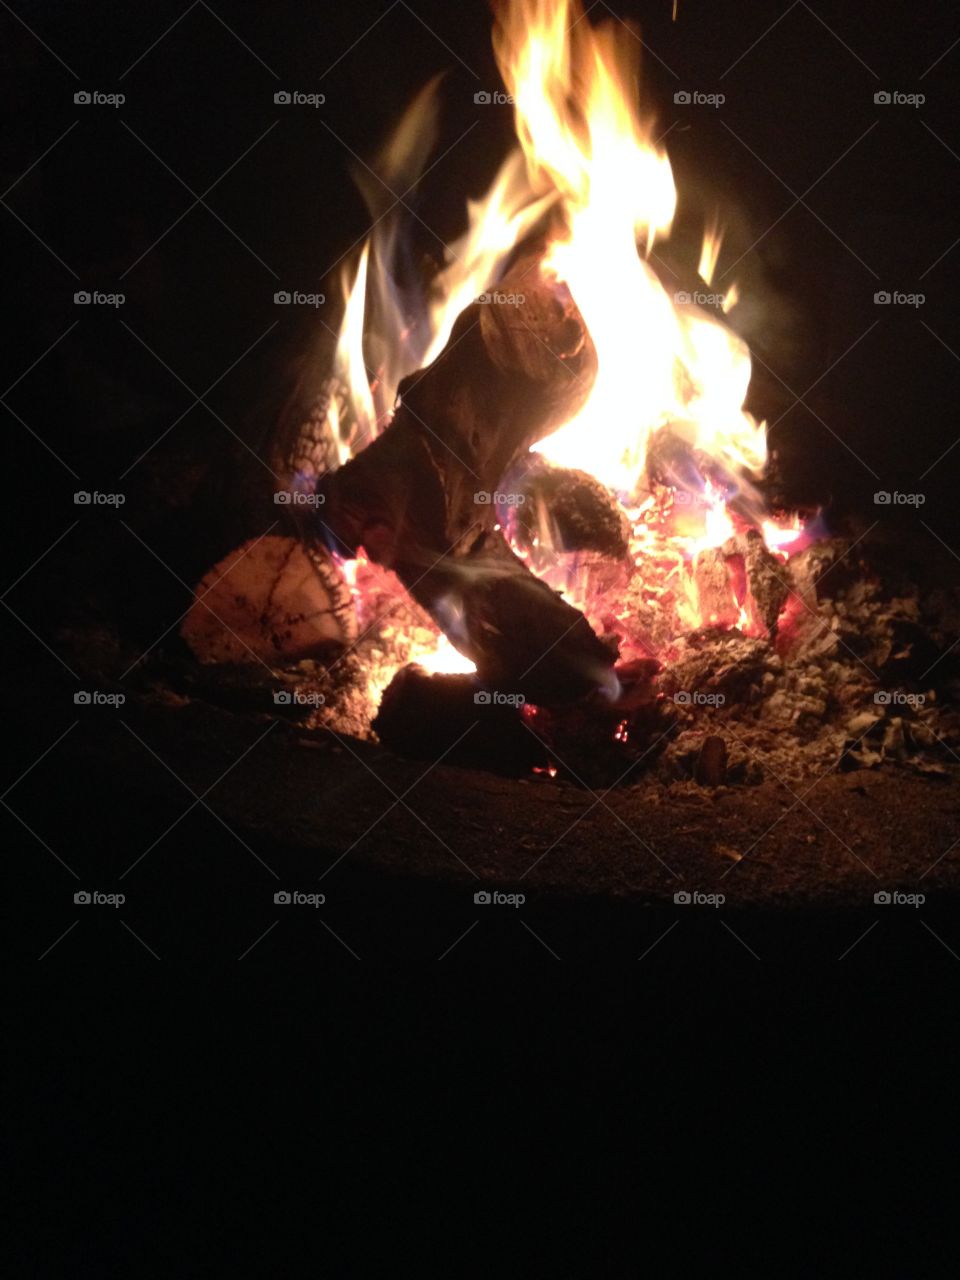 Hanging with friends admiring the amazing camp fire!